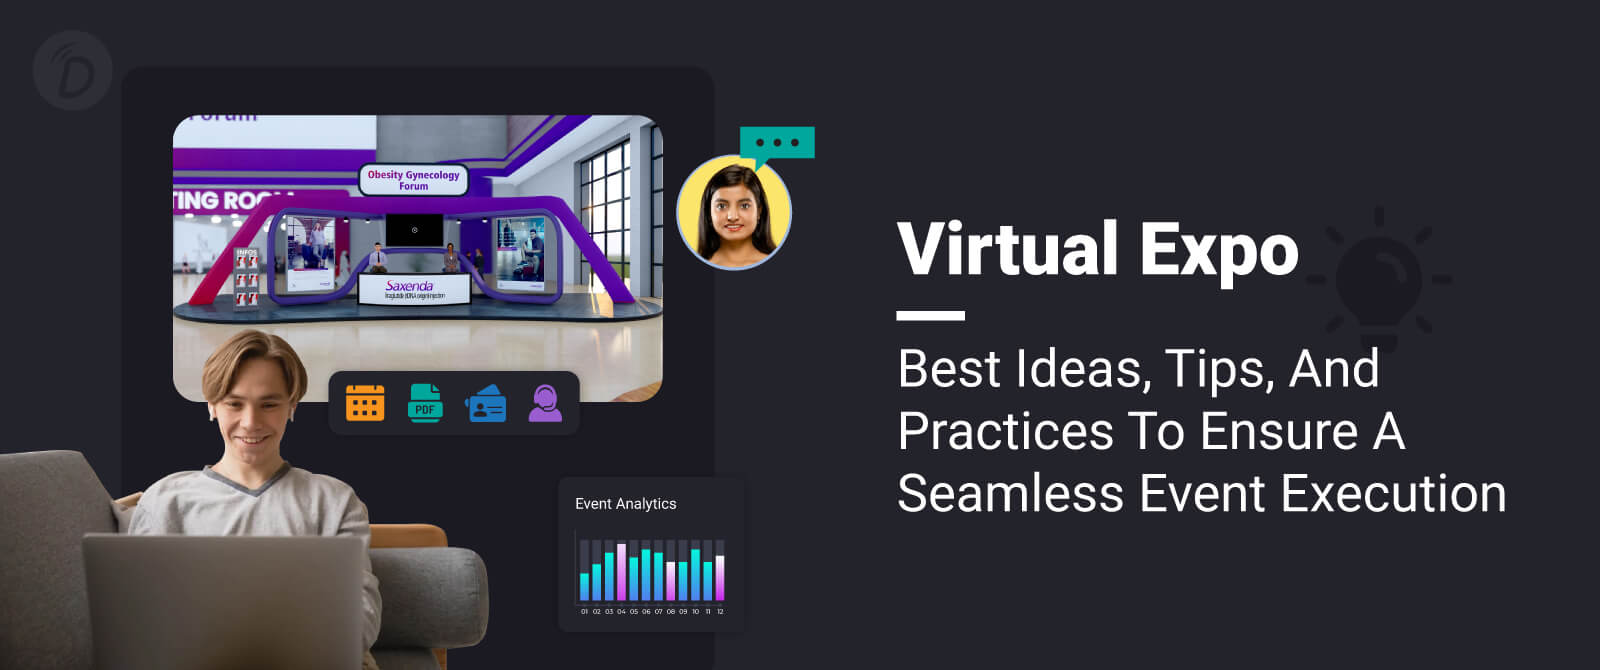 Virtual Expo – Best Ideas, Tips, and Practices to Ensure a Seamless Event Execution